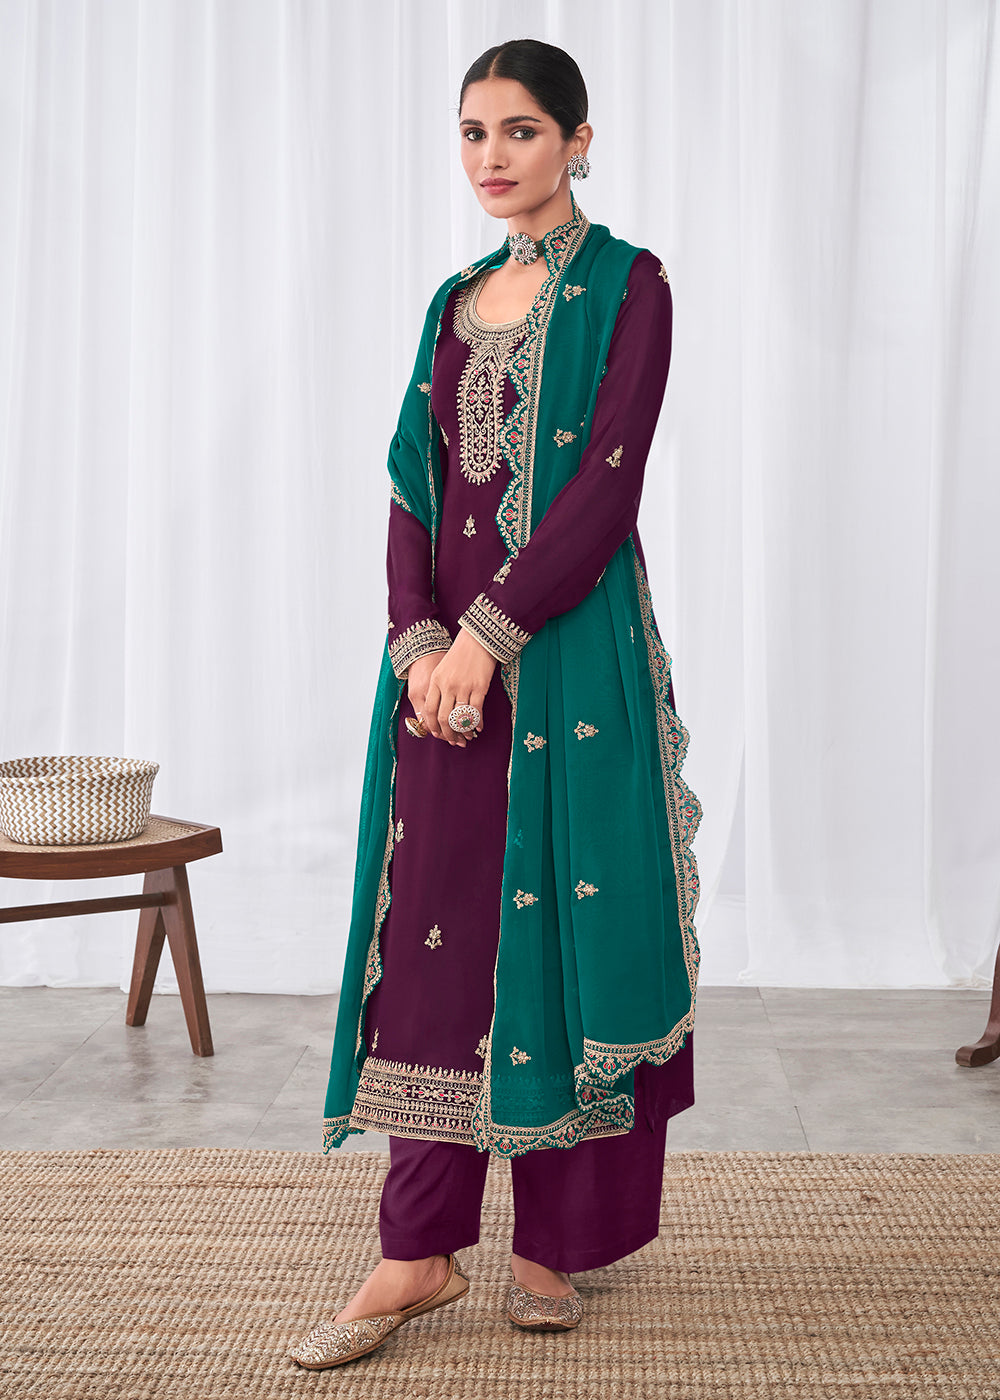 Buy Now Graceful Looking Purple Indian Party Wear Salwar Suit Online in USA, UK, Canada, Germany & Worldwide at Empress Clothing. 